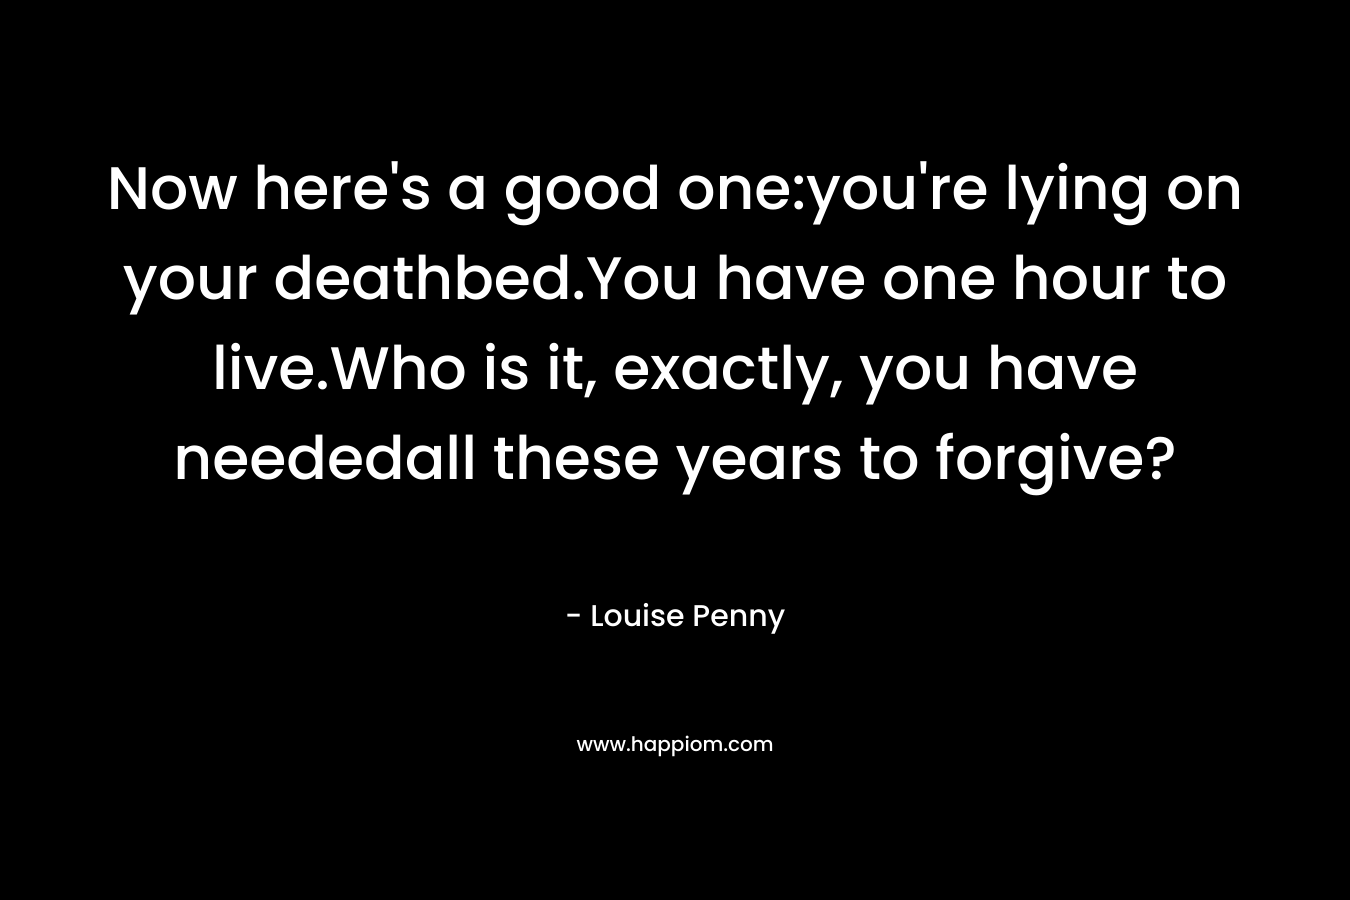 Now here's a good one:you're lying on your deathbed.You have one hour to live.Who is it, exactly, you have neededall these years to forgive?